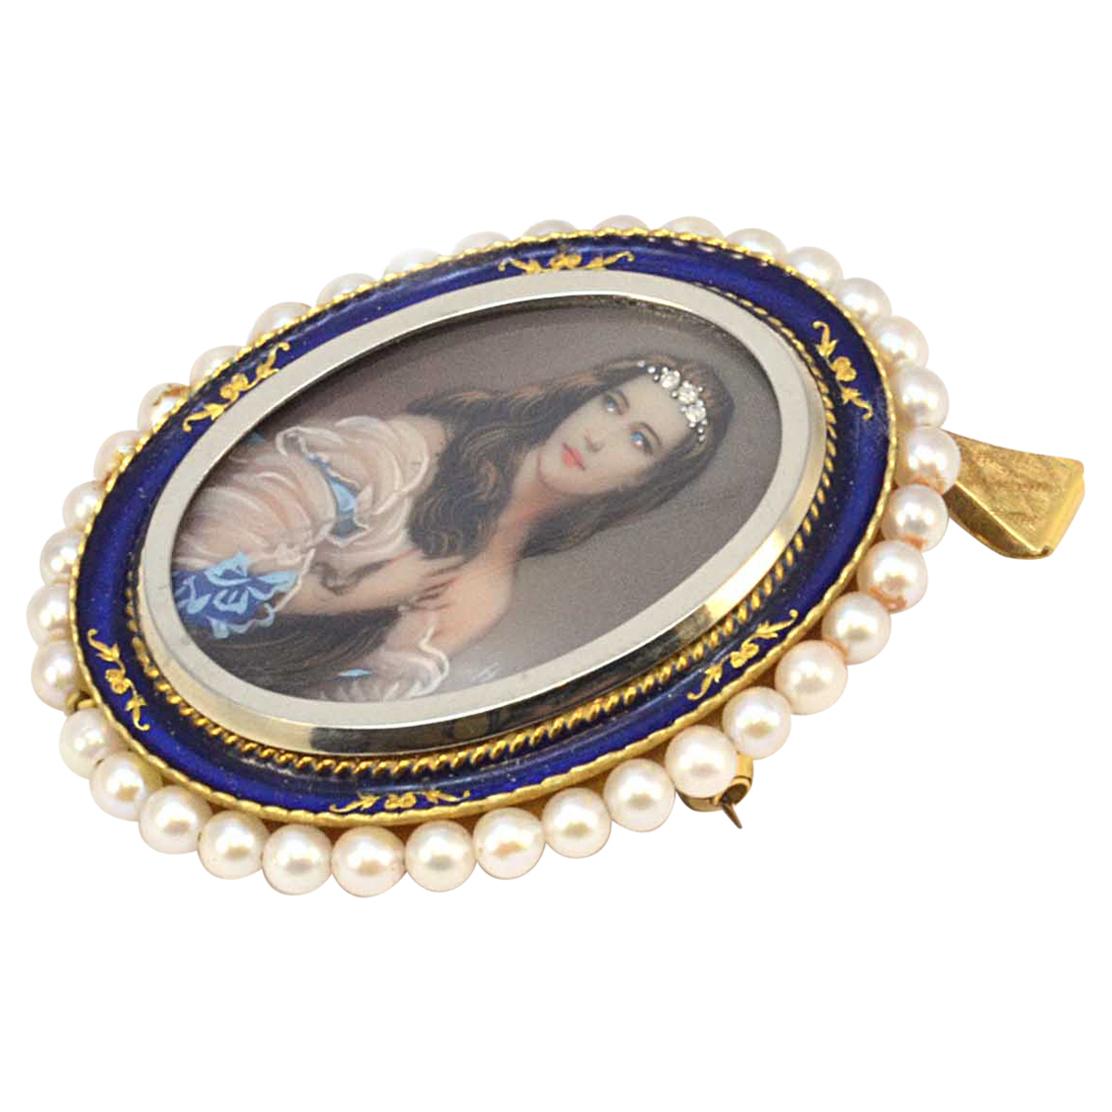 Solid 18K Yellow Gold Pearl, Enamel, Hand Painted Portrait with Diamonds Brooch